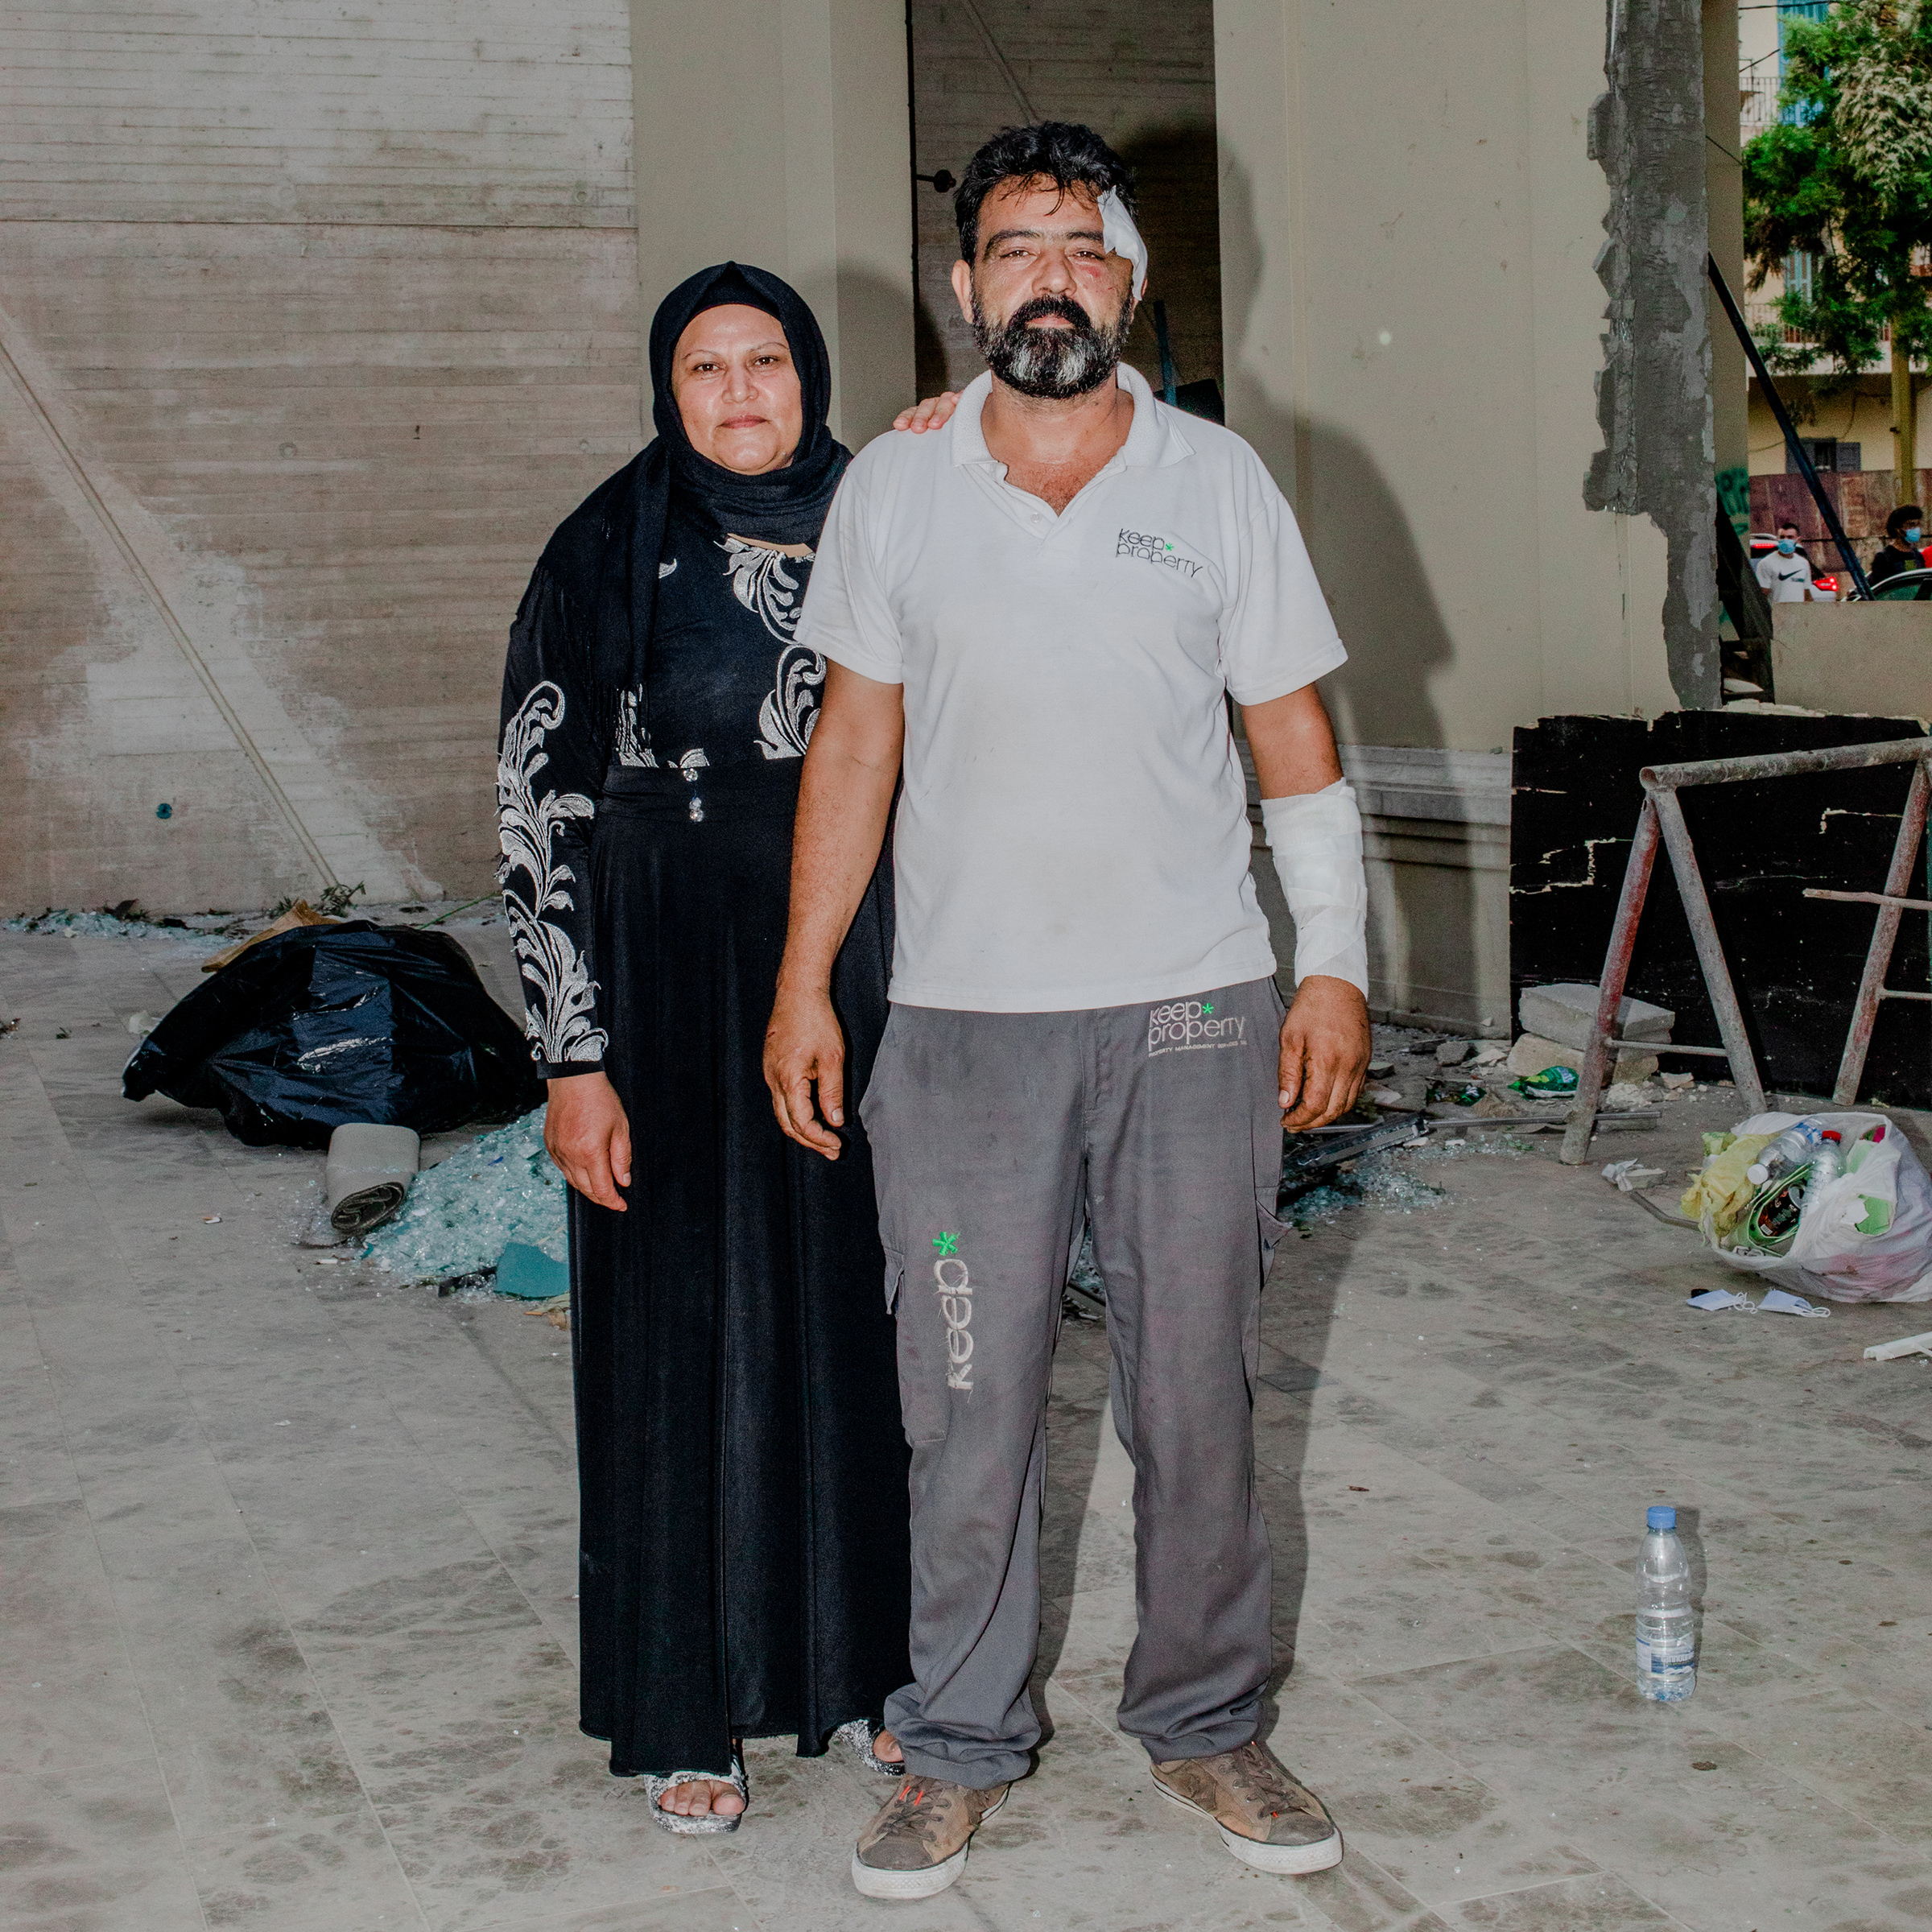 Riad Hussein Al Hussein and his wife Fatima Al Abid in the Mar Mikhael neighborhood of Beirut on Aug. 7. He was buying vegetables there three days earlier when he heard a small explosion. He asked the seller whether he thought it was a shell or a bomb, and where it had landed. "Our discussion lasted approximately one minute and was interrupted by another sound of explosion, one way louder,” he recalls. “I shouted and said we needed to hurry inside the shop, and that is when I was hit by the glass." He later went back to the building where he was injured to assist with cleaning up. "I wanted to help like I had been helped," he said. "I wanted to pay it forward." (Myriam Boulos for TIME)